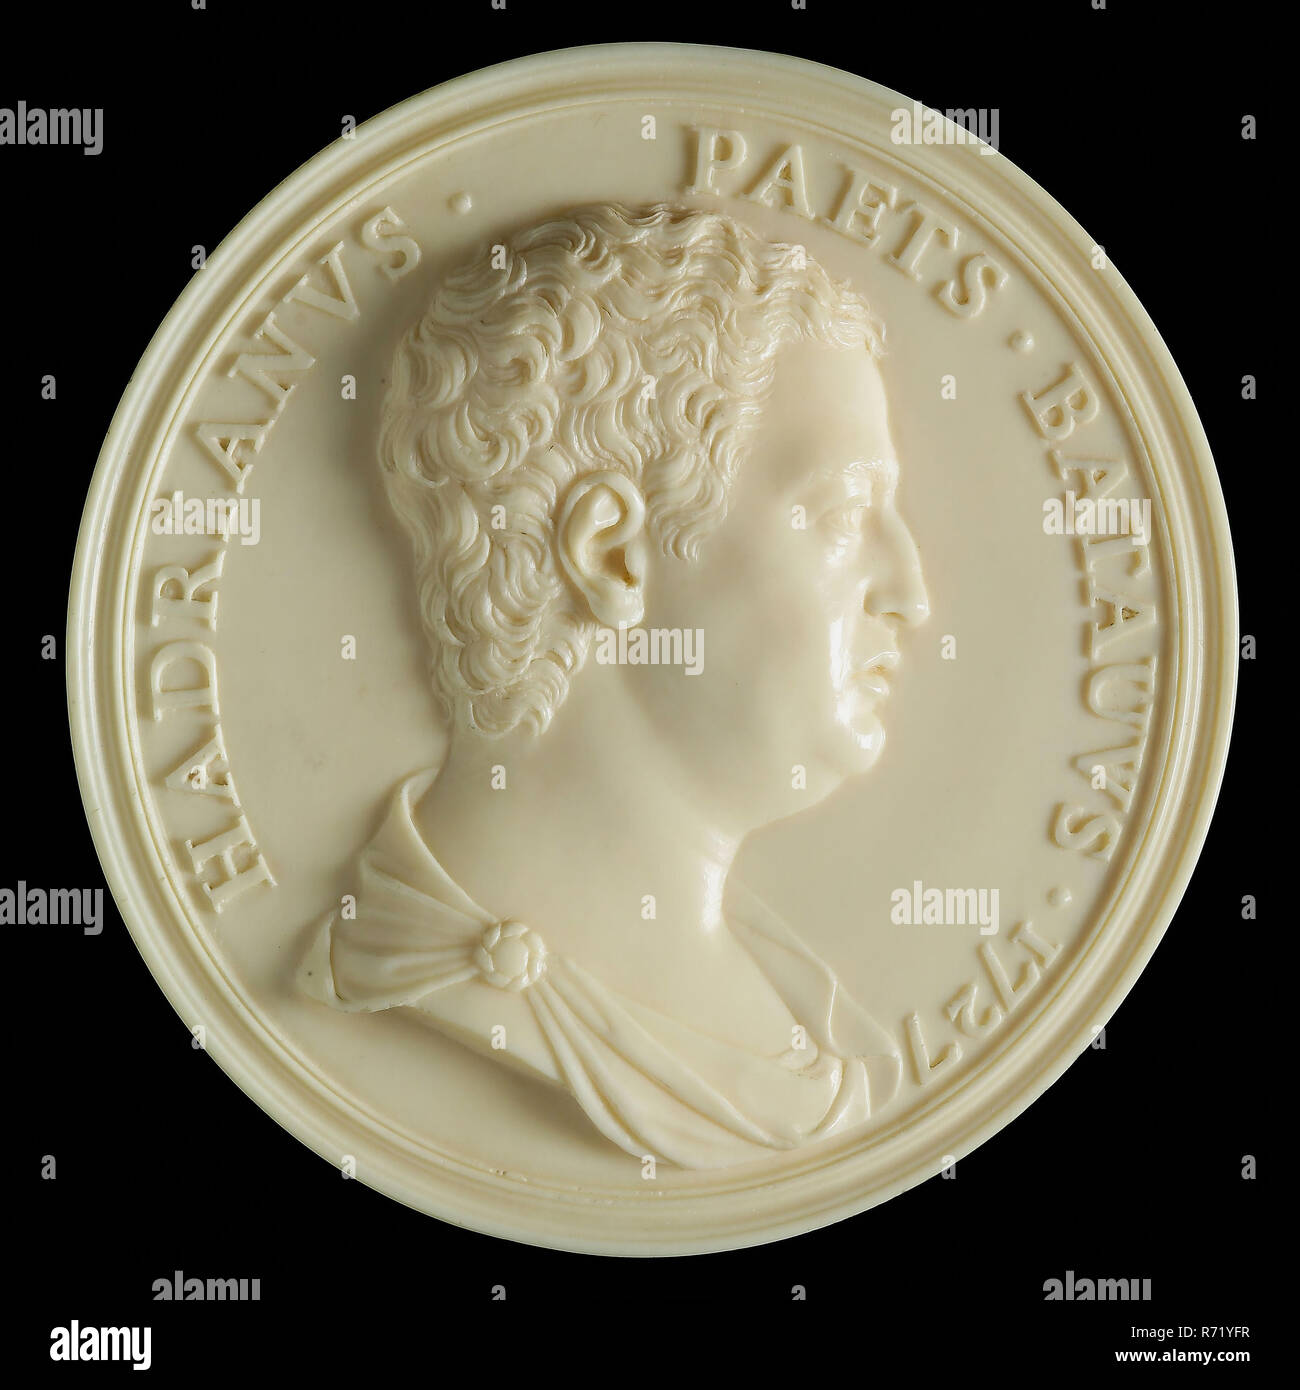 Portrait medallion Adriaen Paets (1697-1765), medallion ivory, right-reanimated bust Adriaan Paets, HADRIANVS. - PAETS BATAVUS 1727 (roundabout) Rotterdam board director Dutch East India Company VOC VOCR Originating from the collection of H.K.H. princess Marianne of the Netherlands which collection was auctioned in Amsterdam in 1933. Stock Photo